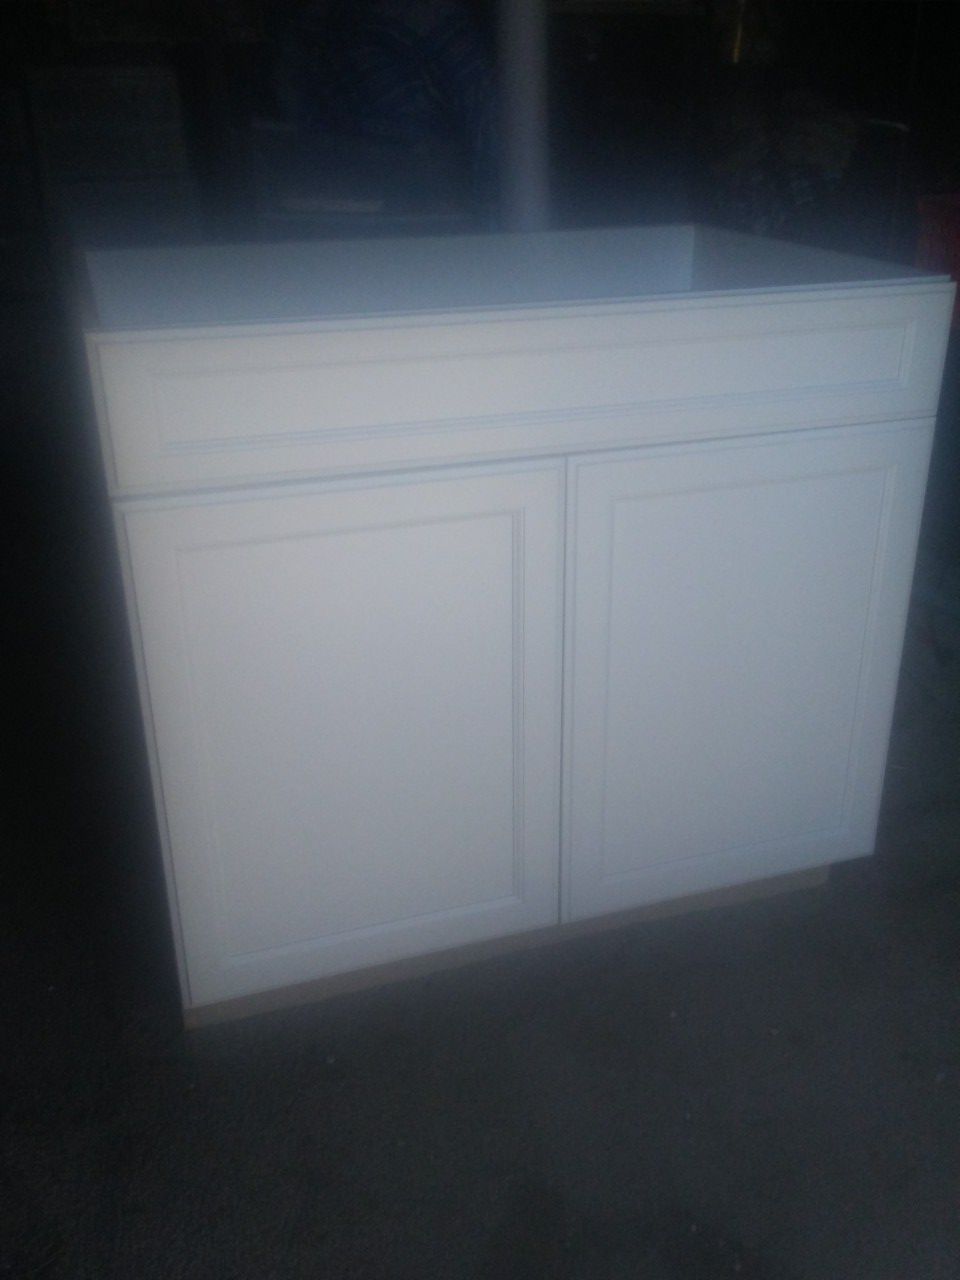 Brand new kitchen base cabinet made by bellmont cabinet company brand new just out of the box